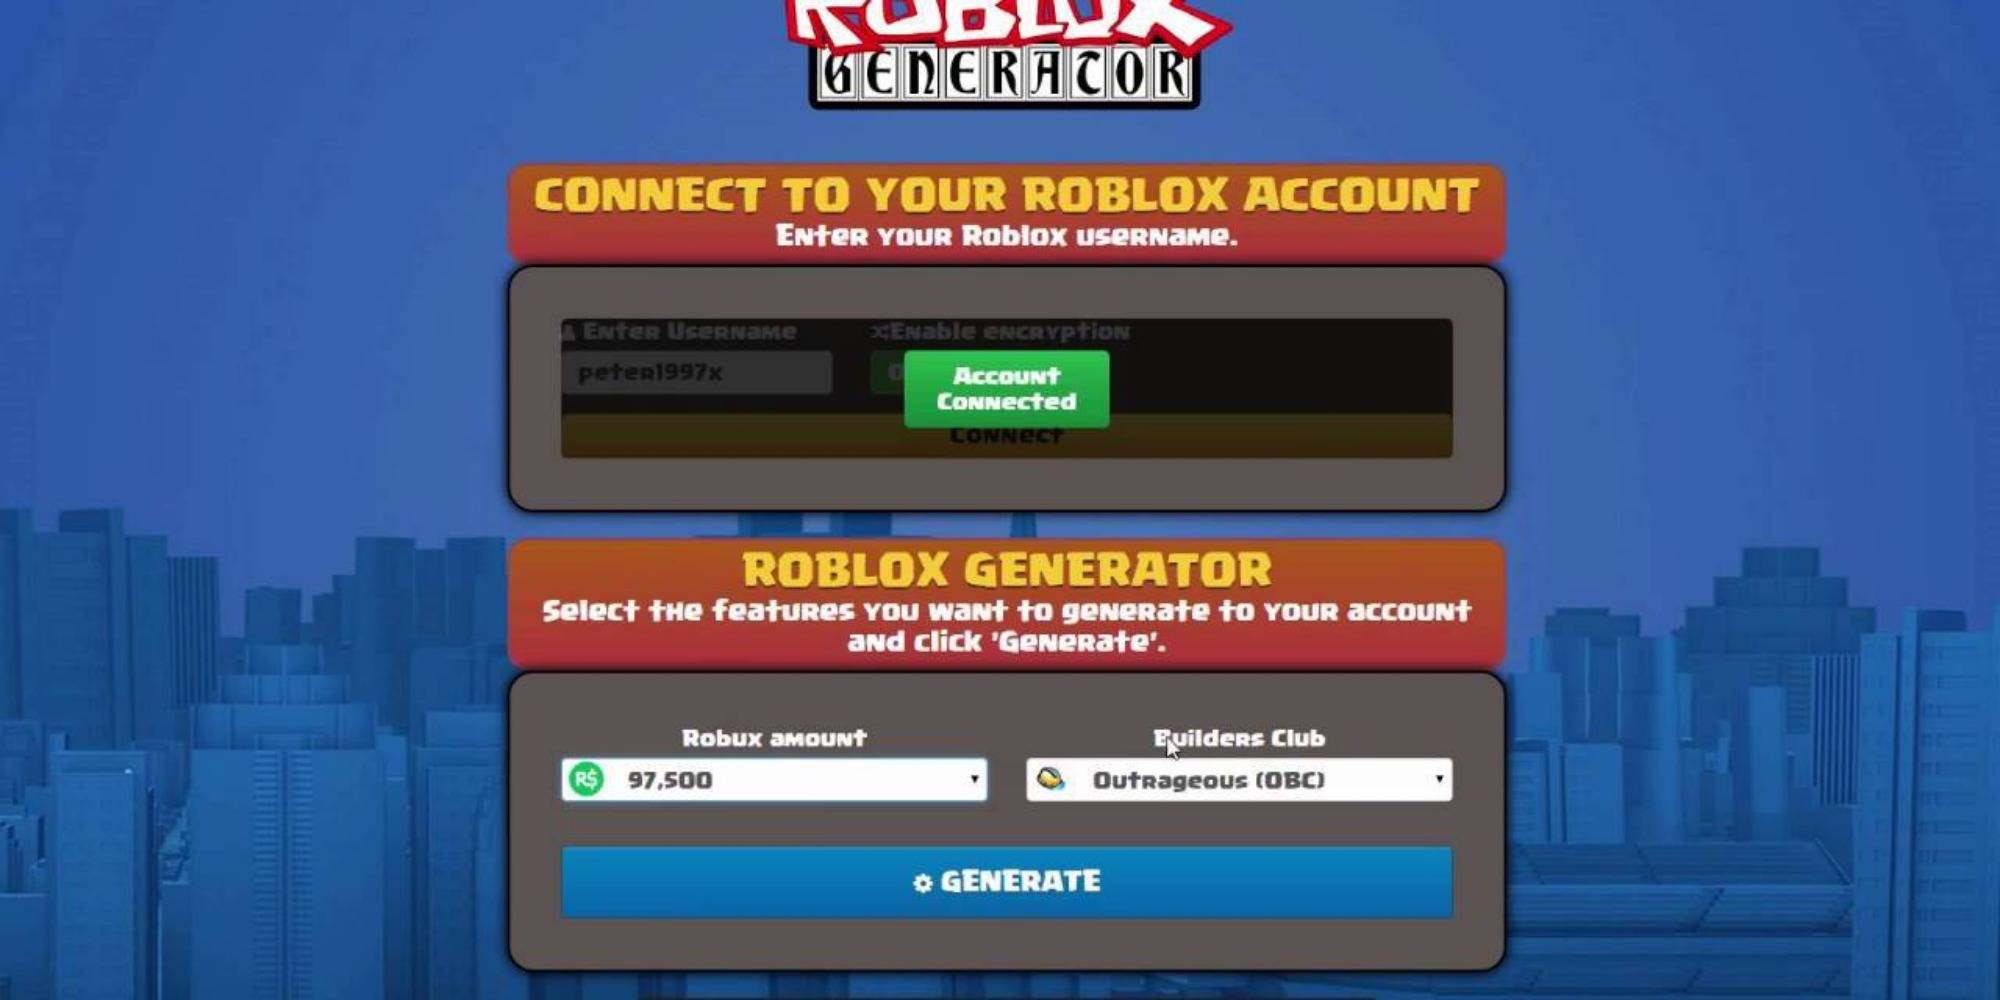 Roblox Easy Ways To Get Robux - legal ways to get robux